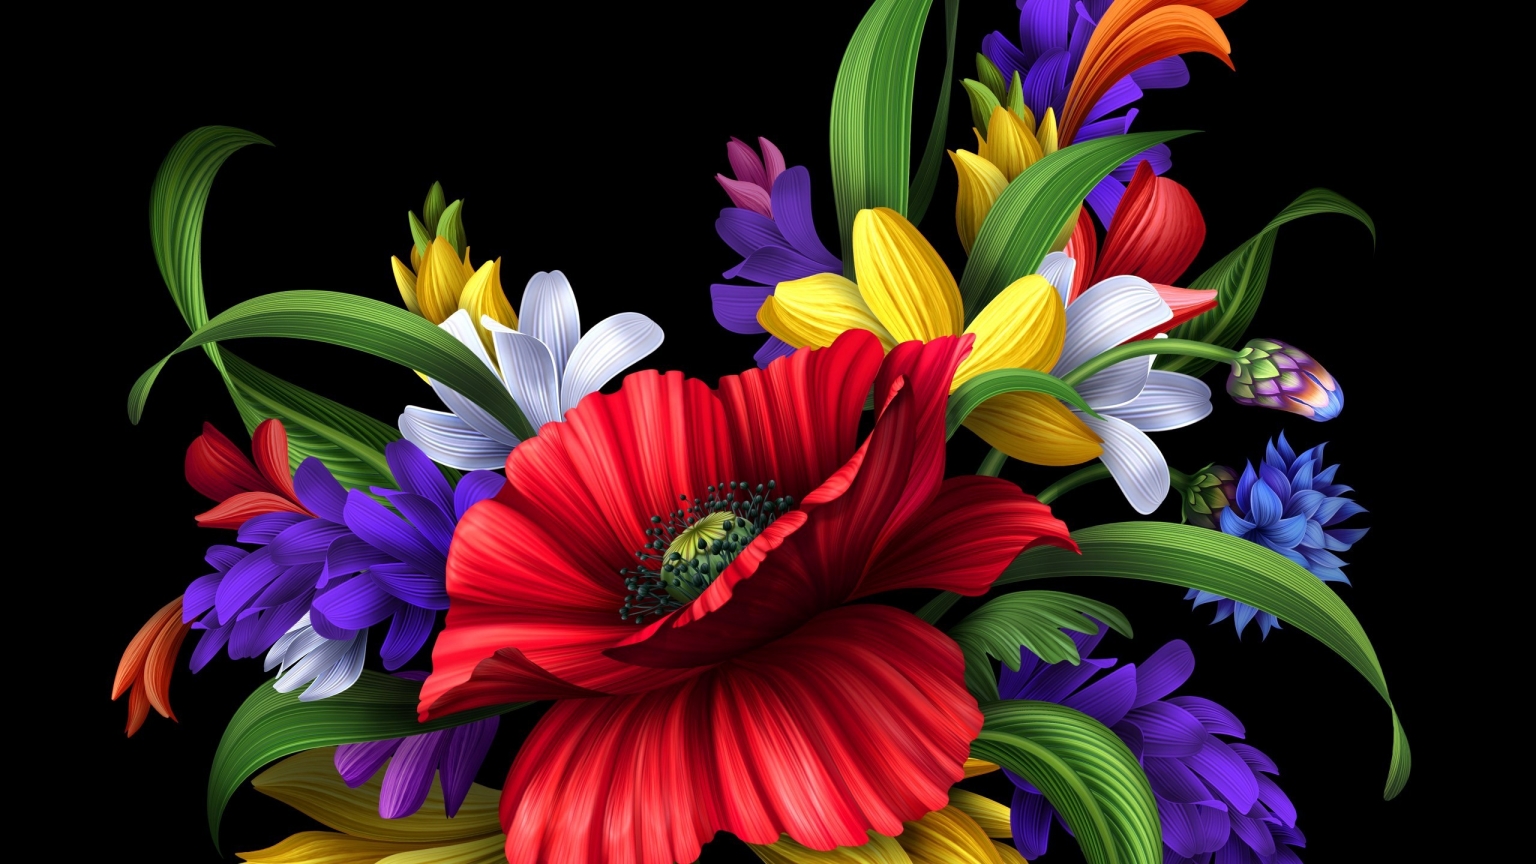 Special Flower Bouquet for 1536 x 864 HDTV resolution